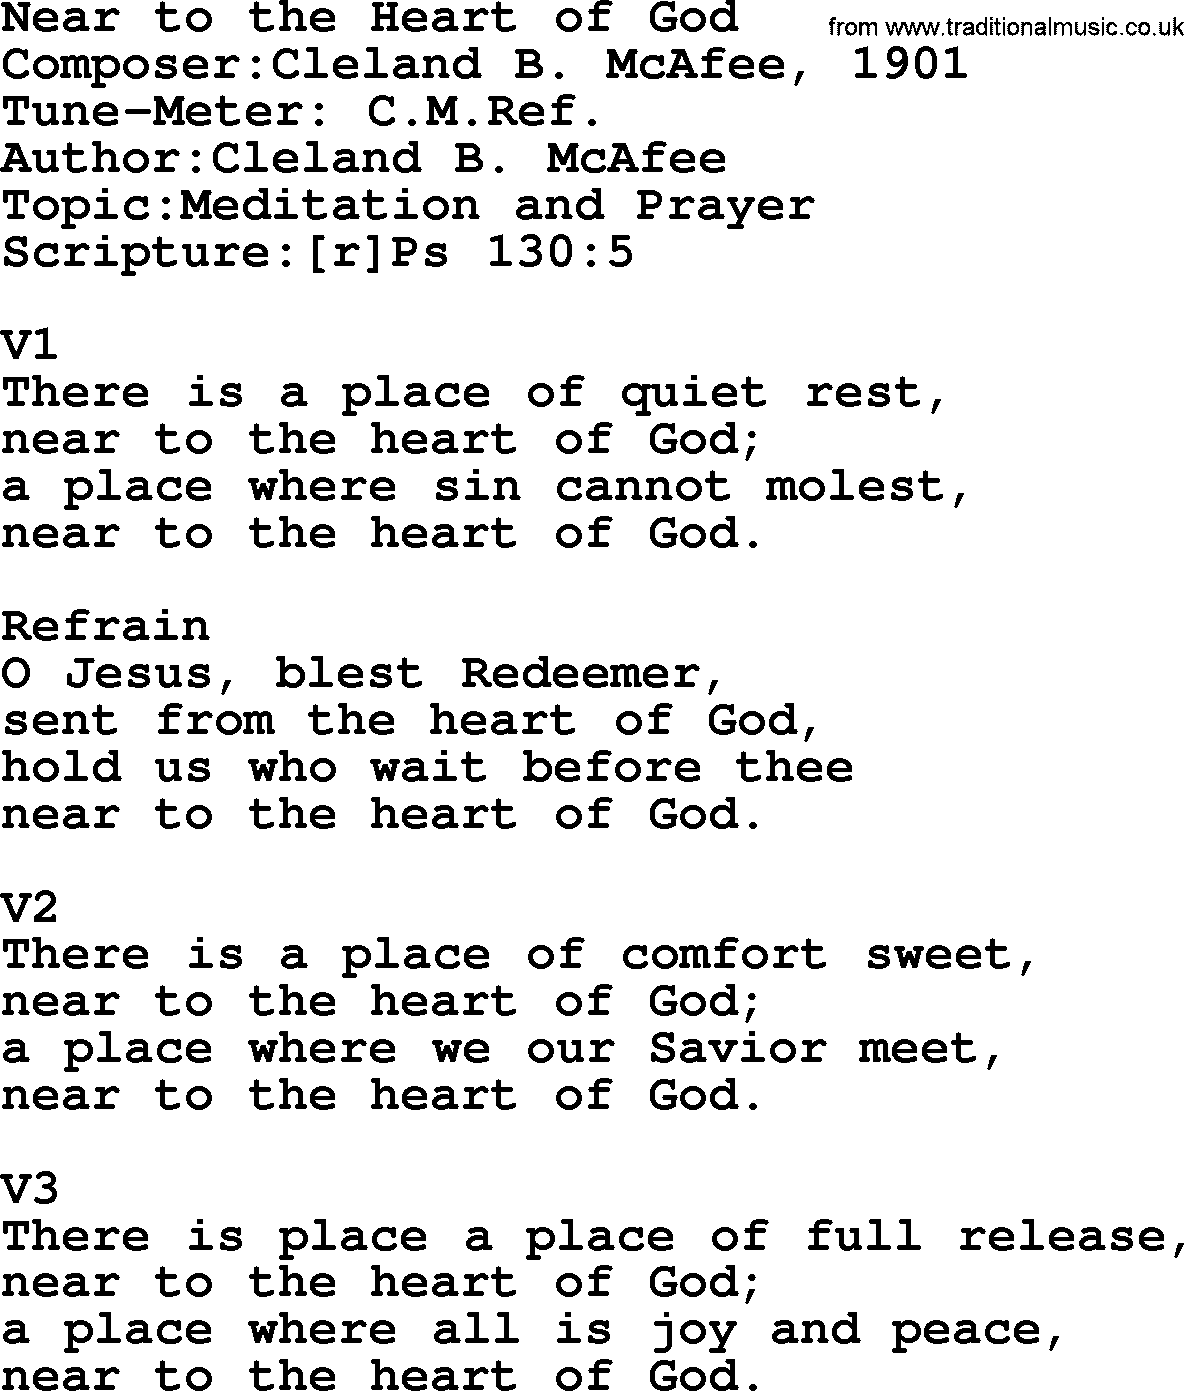 Adventist Hynms collection, Hymn: Near To The Heart Of God, lyrics with PDF